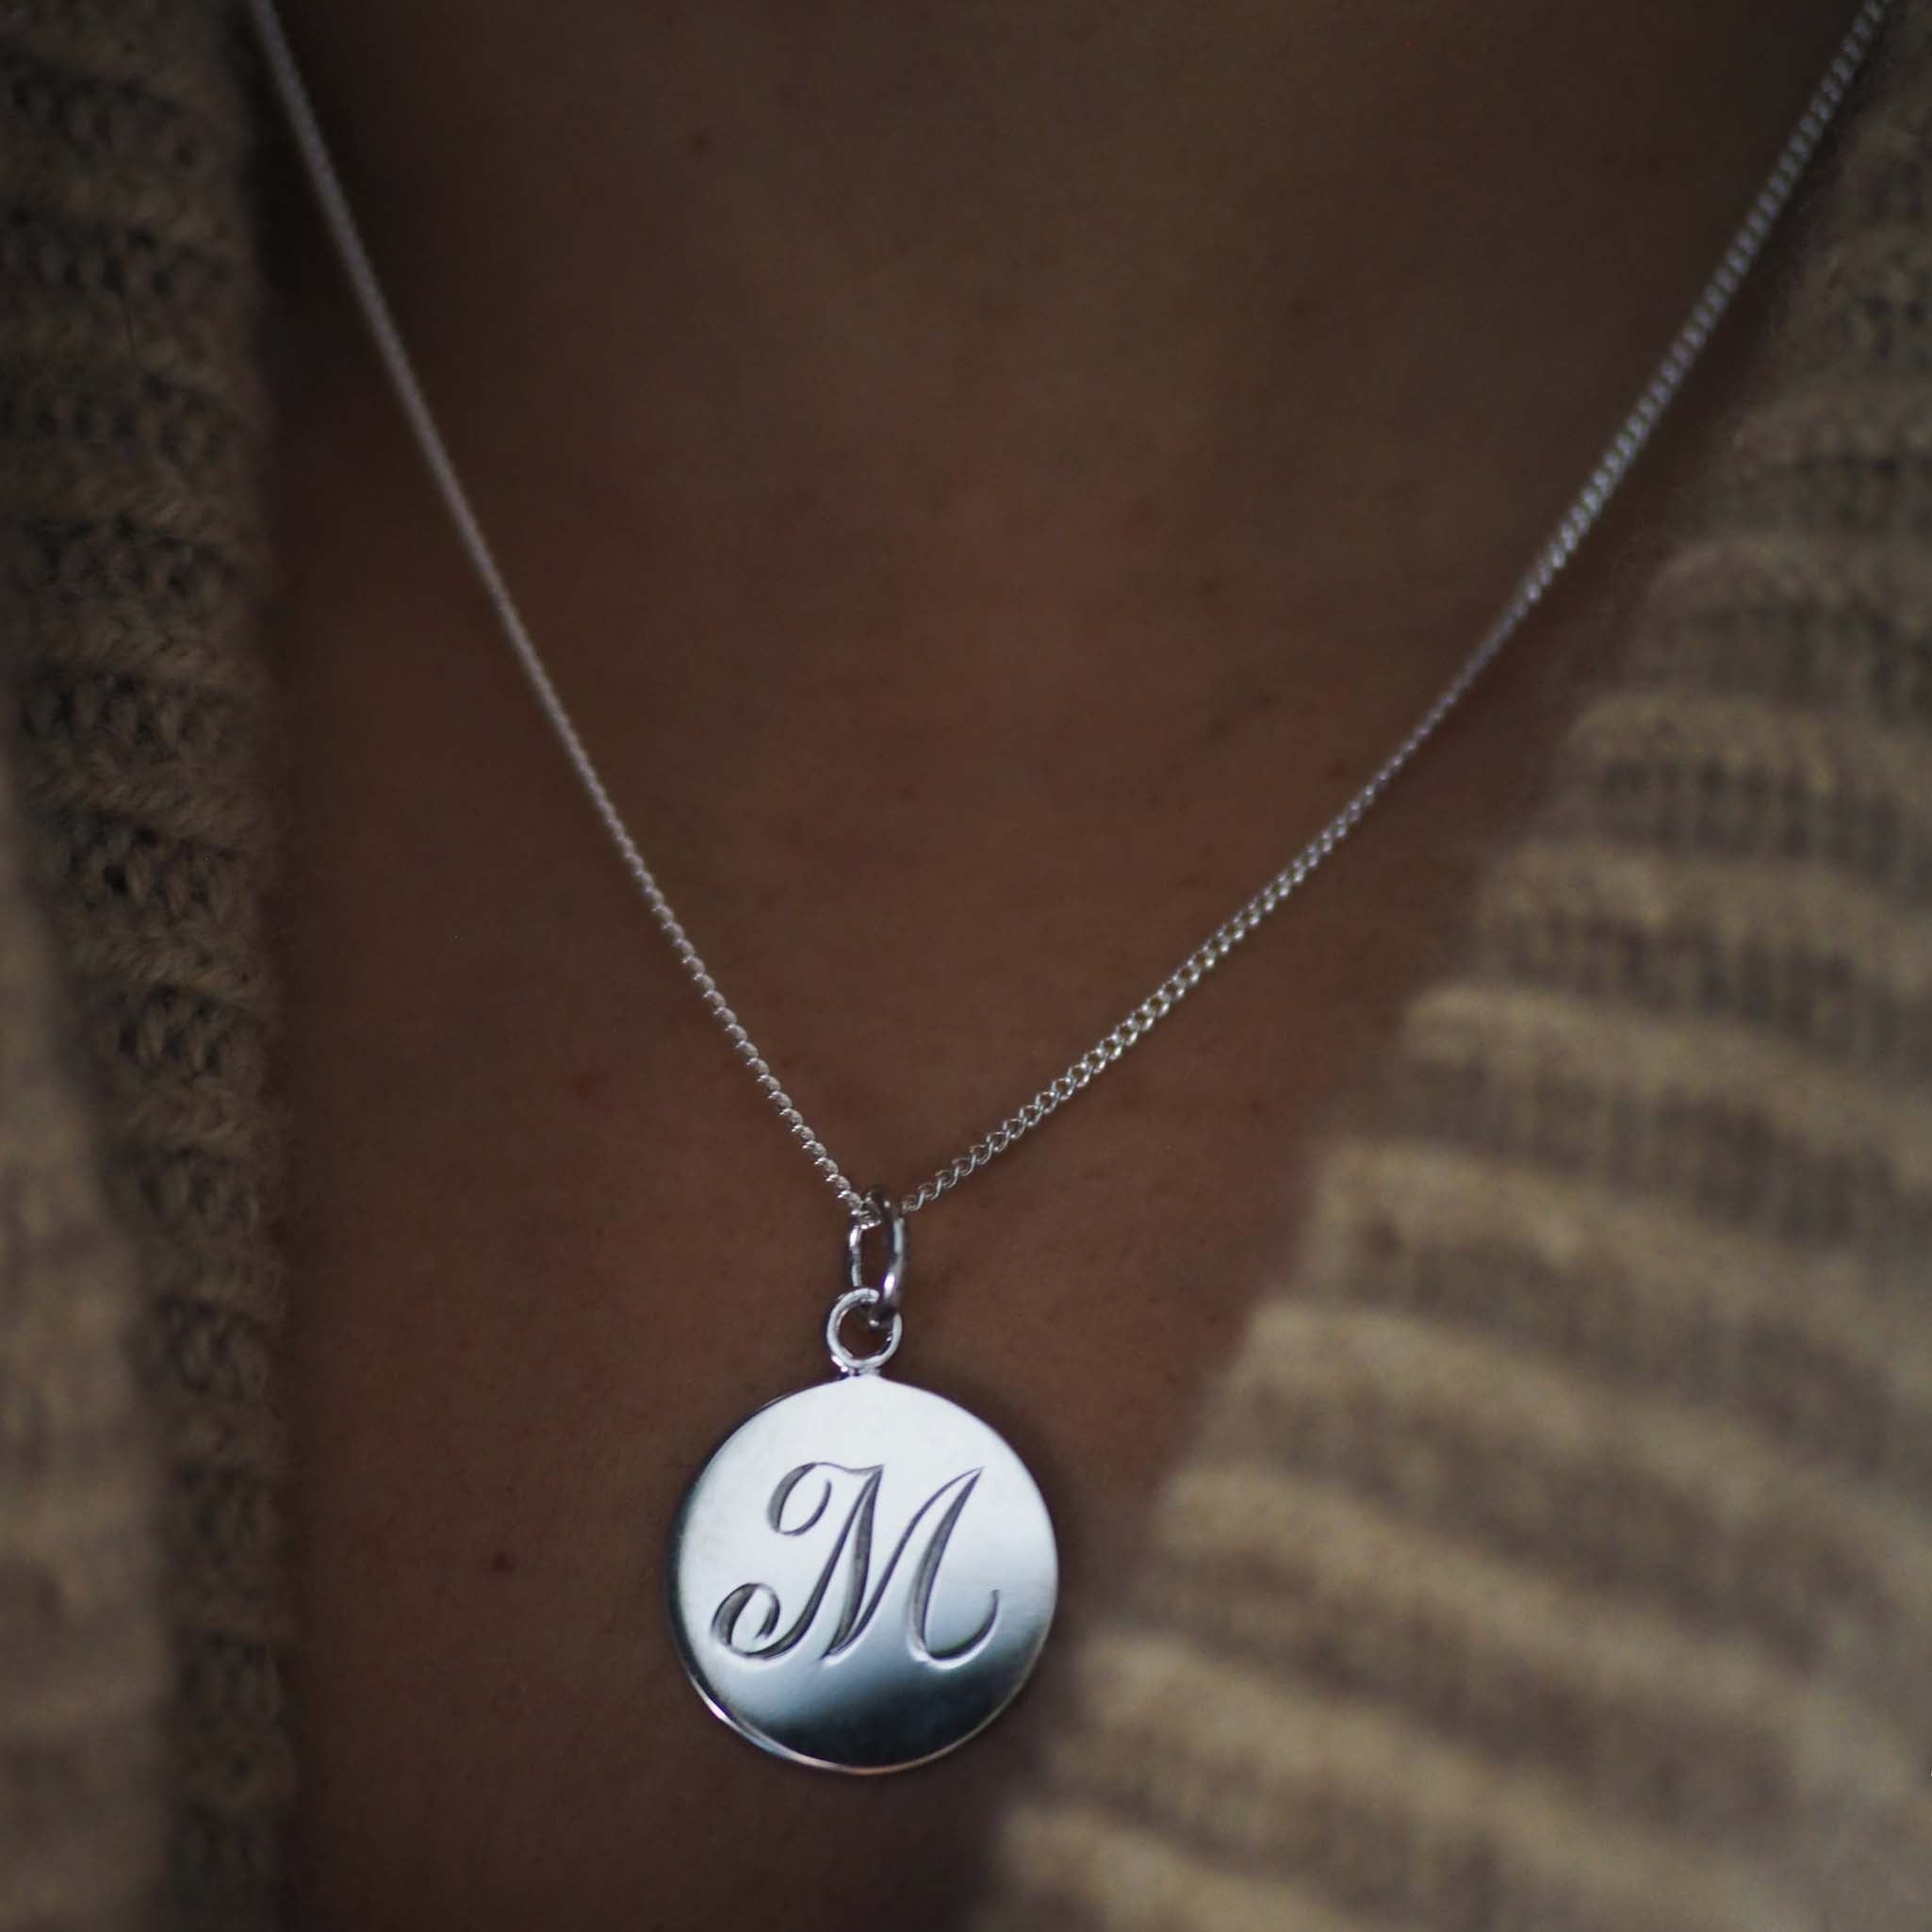 Bianca Jones hand-engraved script initial charm available in silver or gold vermeil, offering a personalised touch of elegance